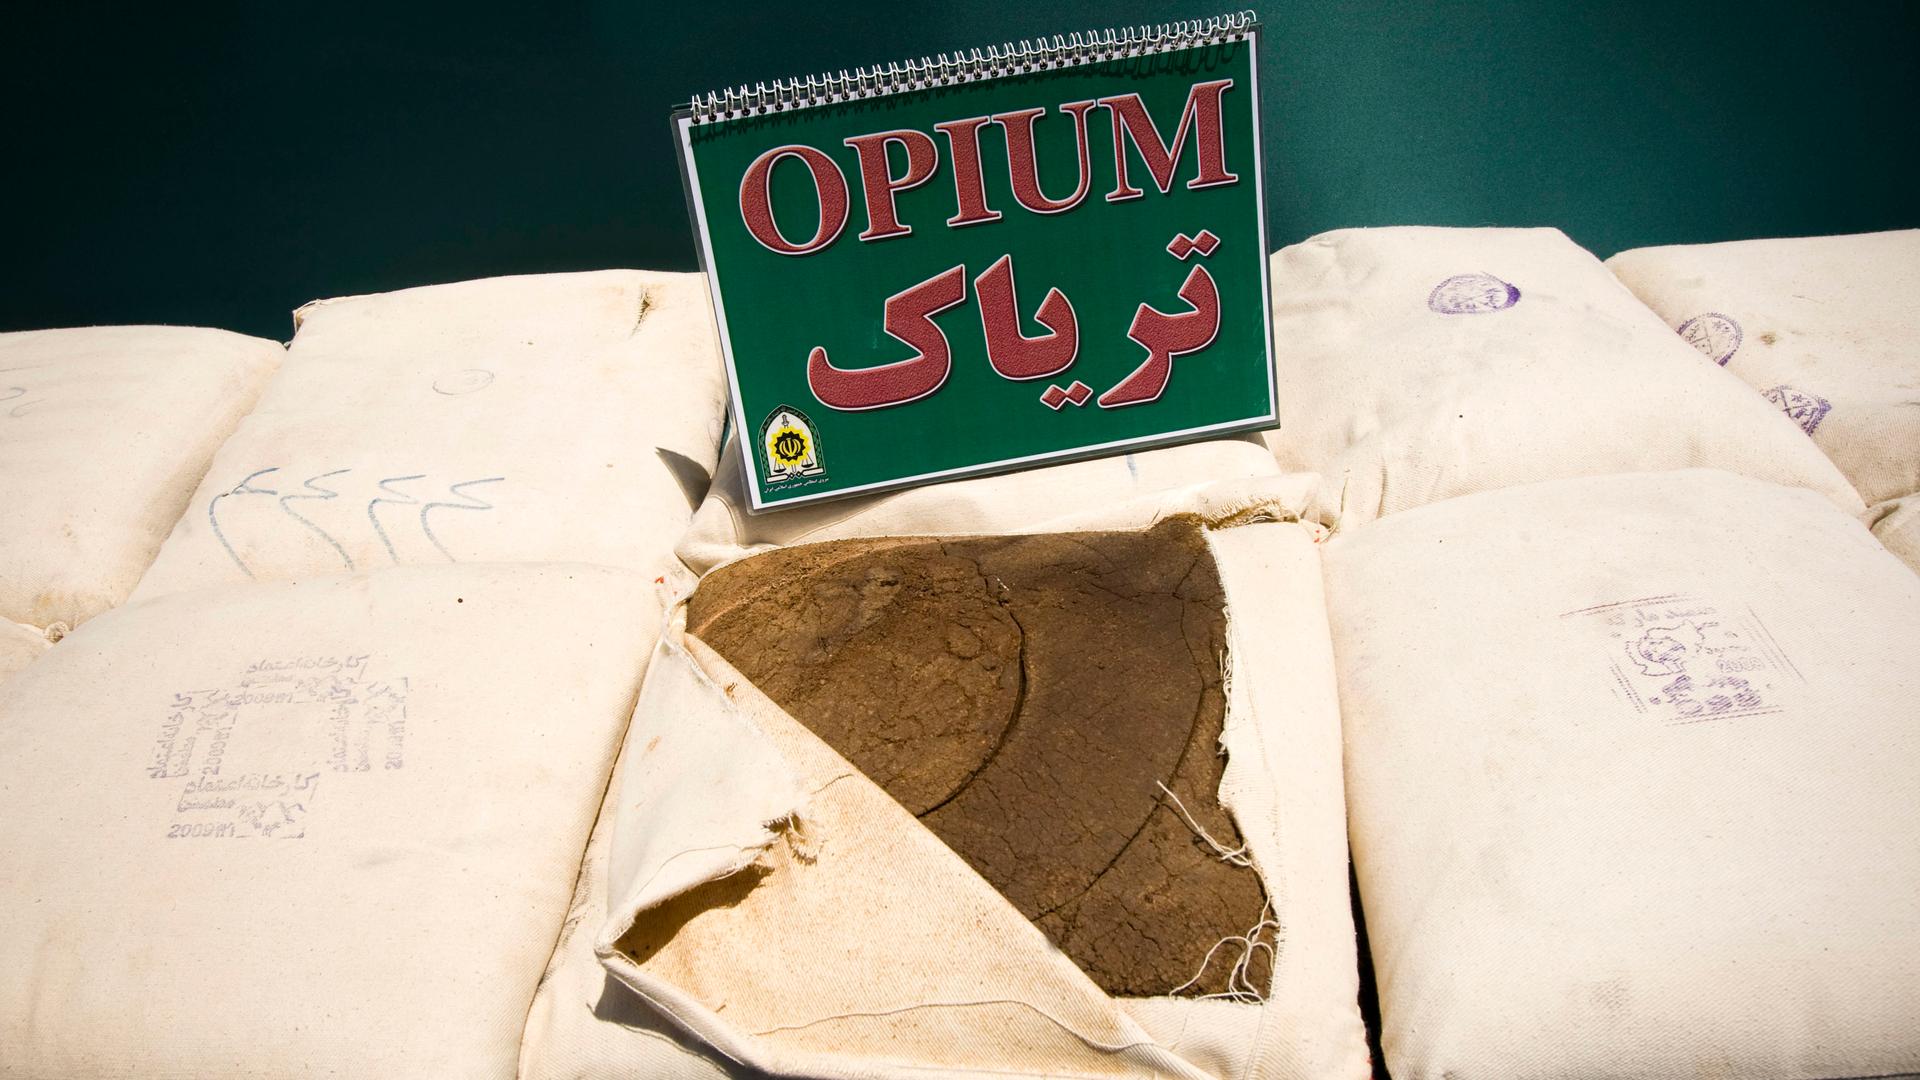 Confiscated opium in Iran